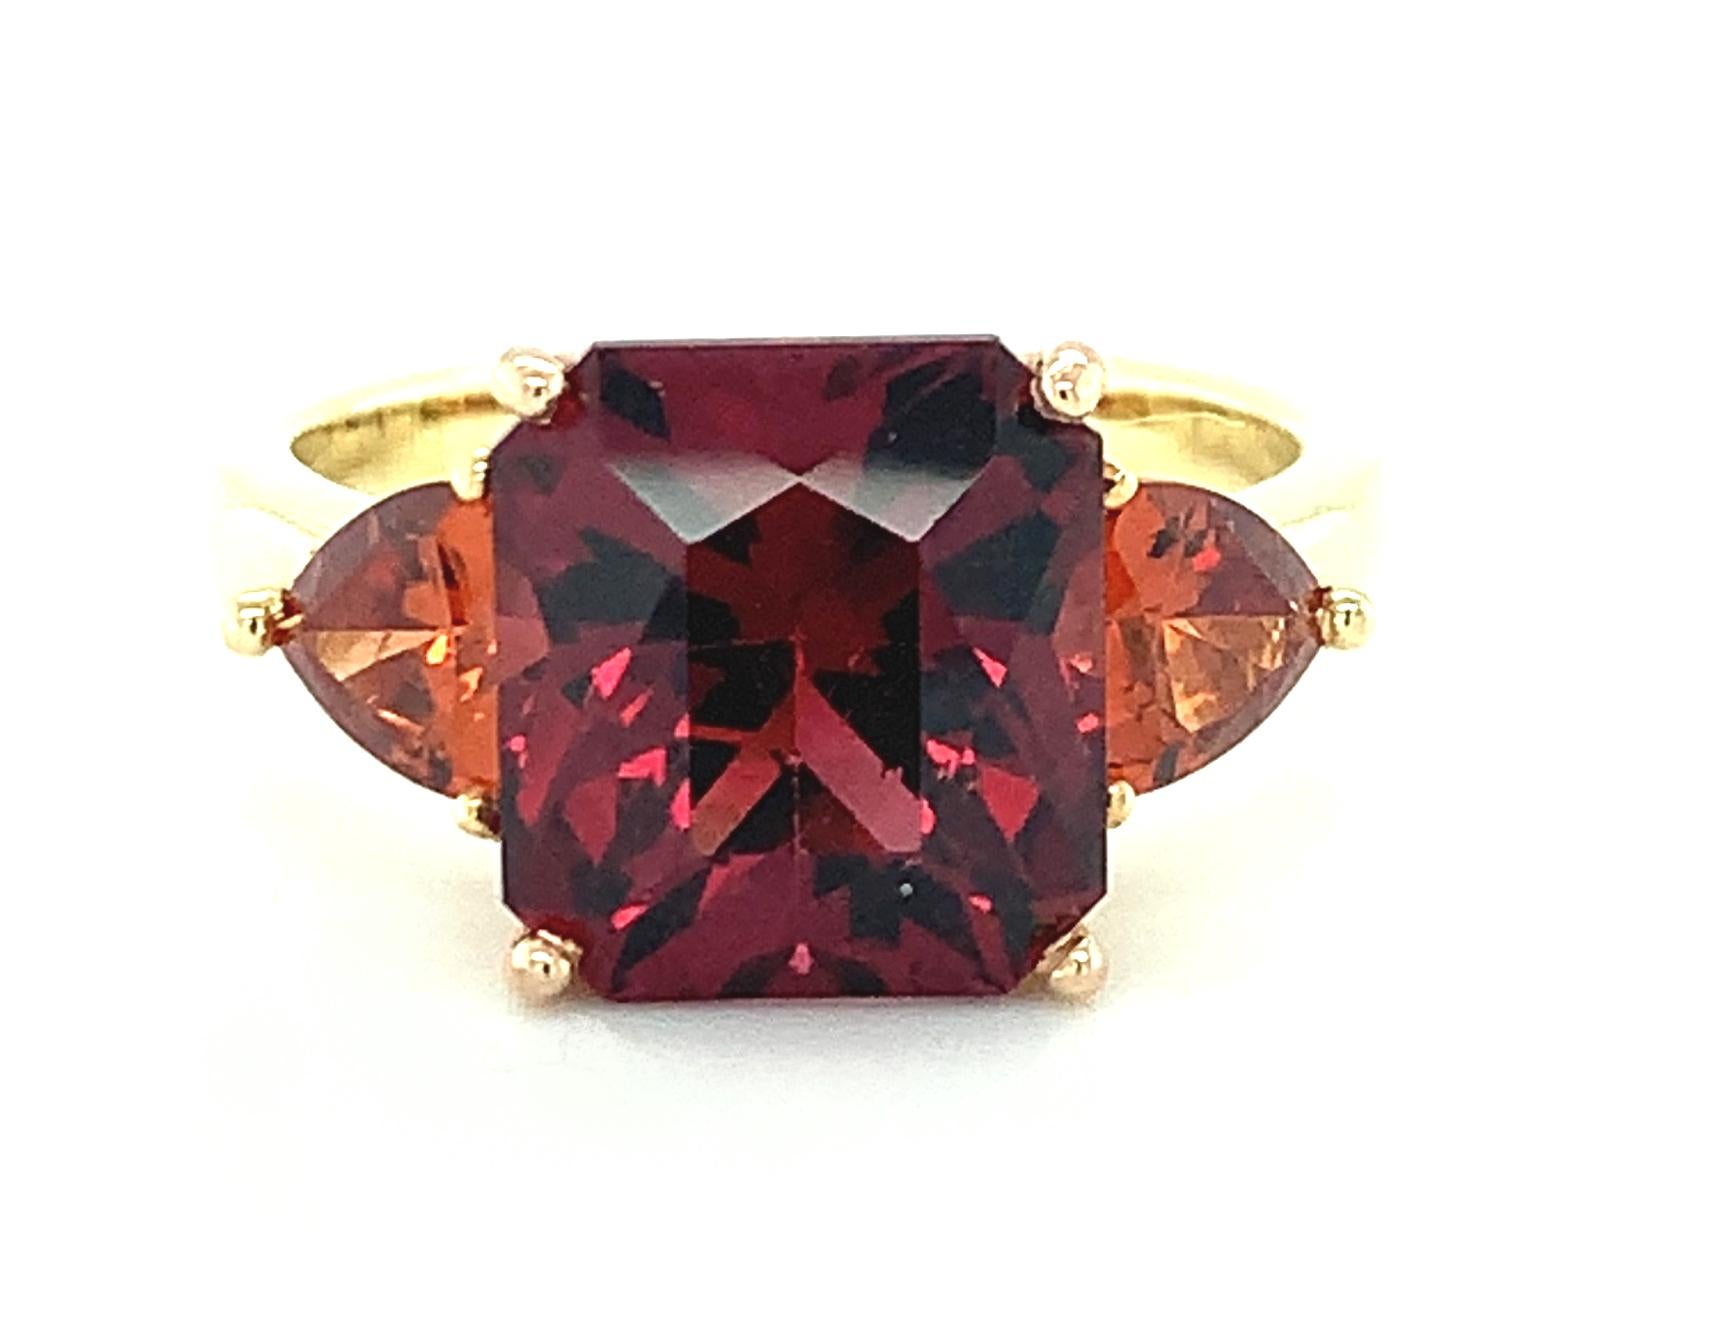 Rich colors and fancy shapes make this colored gemstone ring extra special! We have paired a large, 6.09 carat red garnet with 2 rounded trilliant-cut, orange spessartite garnets in a sleek and modern interpretation of the classic 3-stone ring.